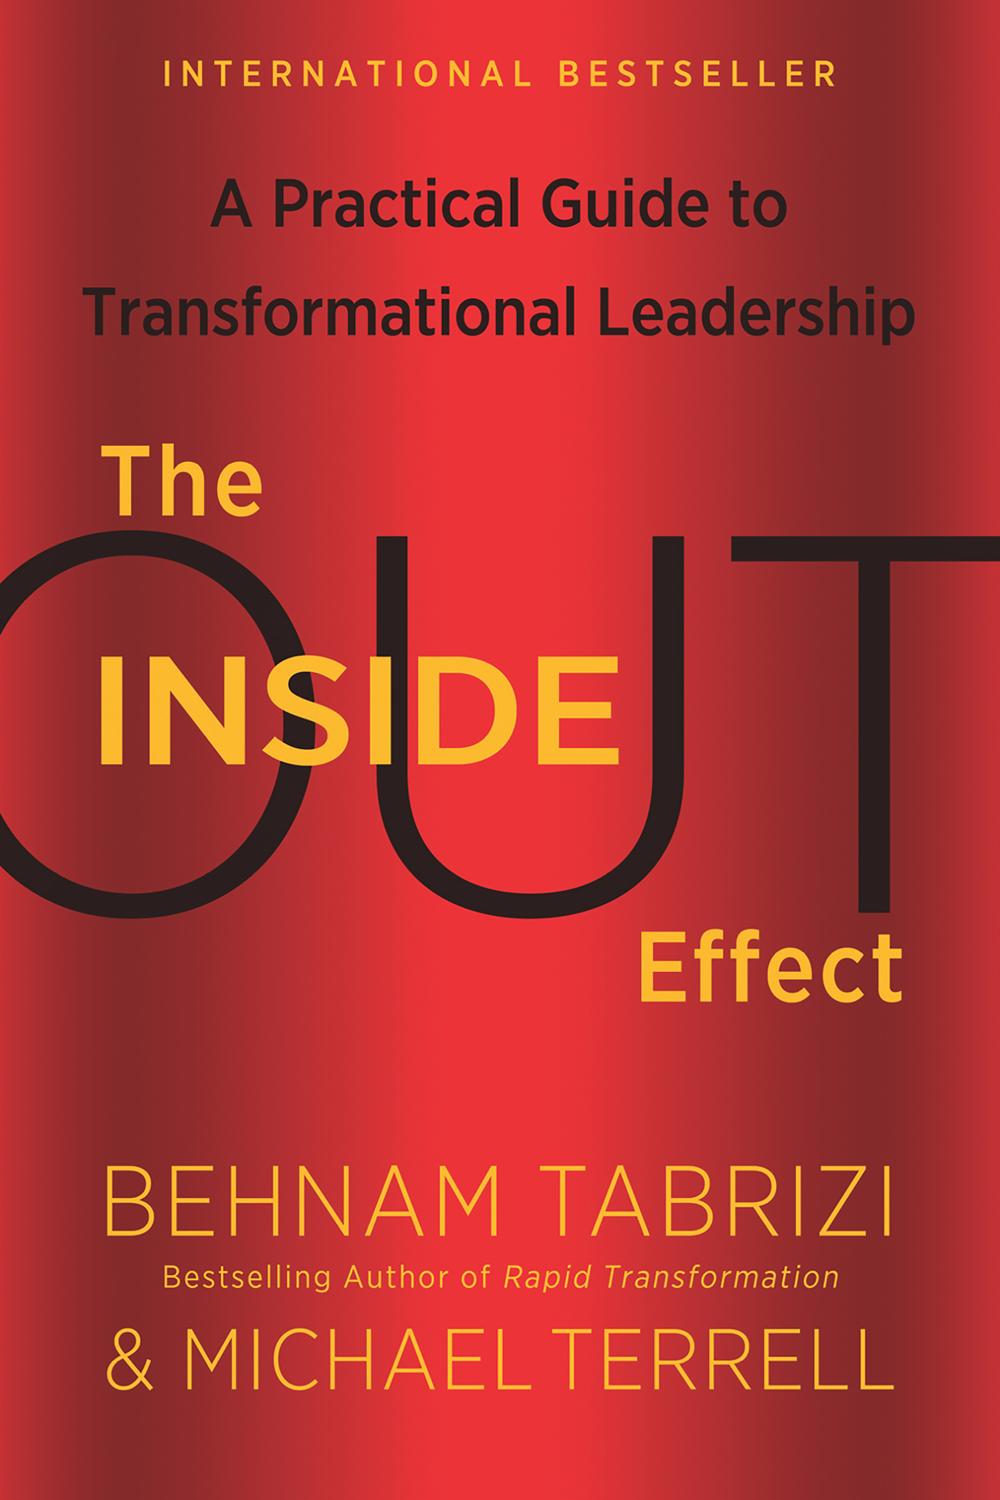 The Inside-Out Effect - Behnam Tabrizi, Michael Terrell